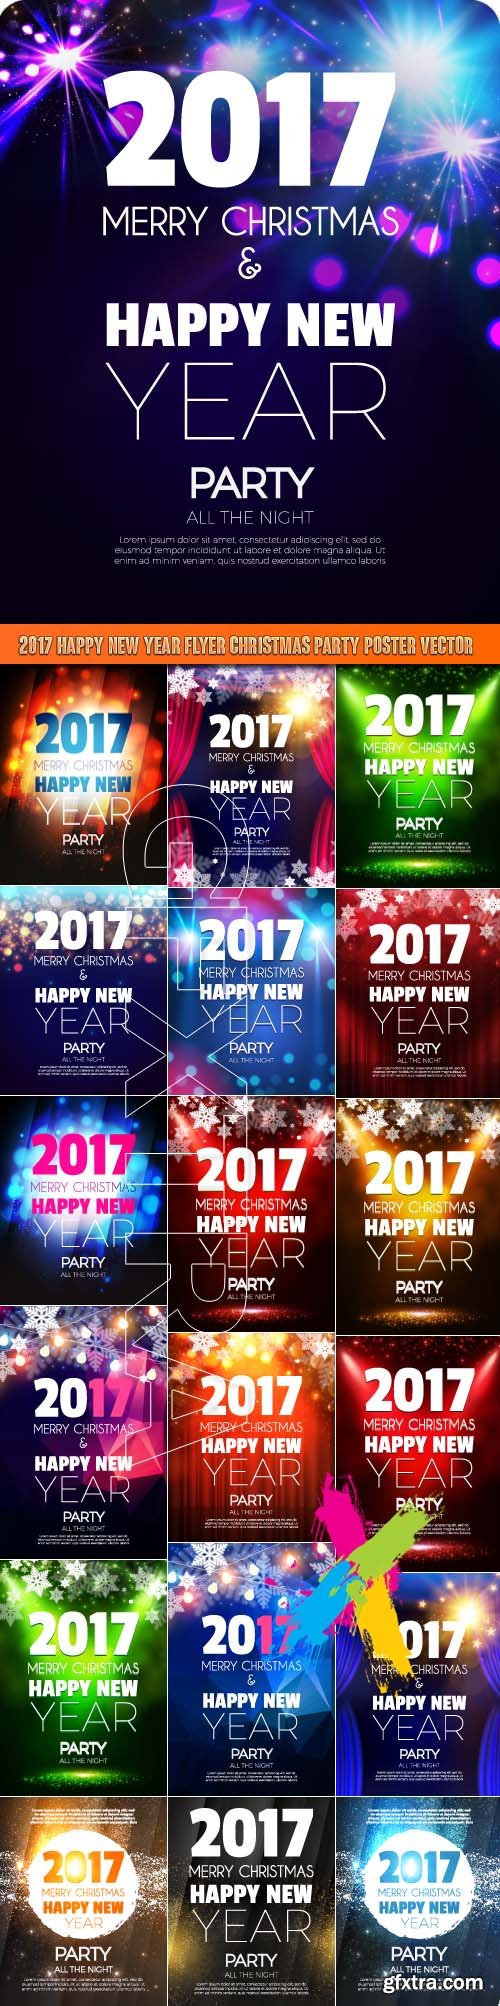 2017 Happy New Year Flyer Christmas Party Poster vector